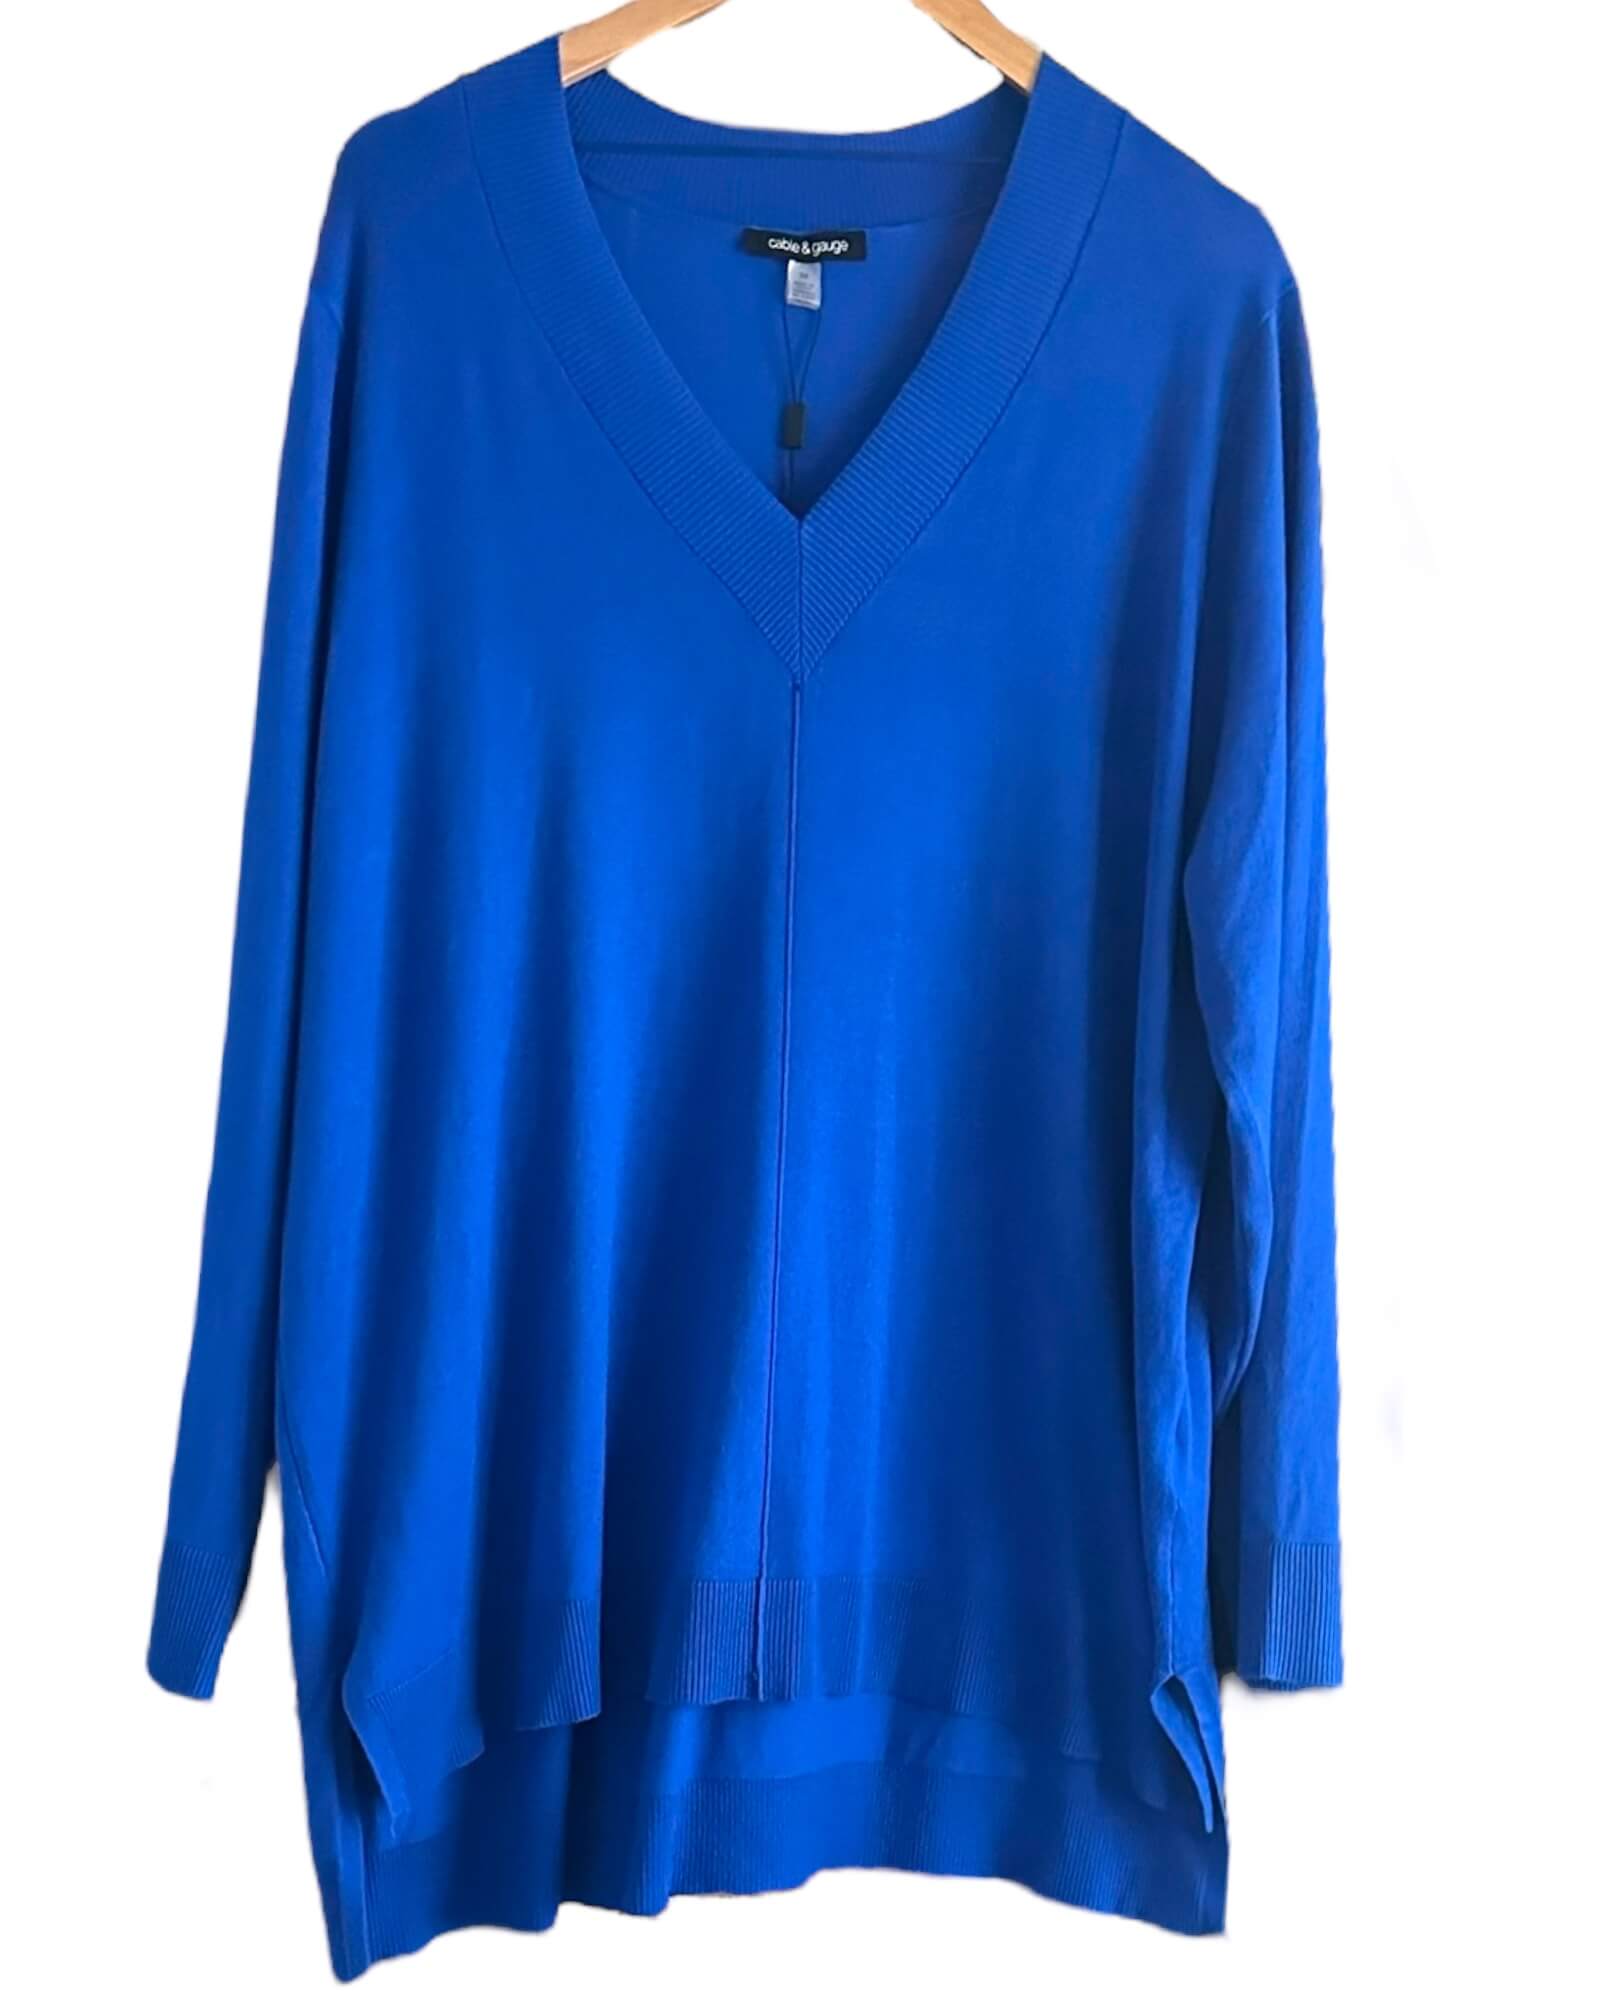 Bright Winter Cable & Gauge sapphire blue v-neck sweater